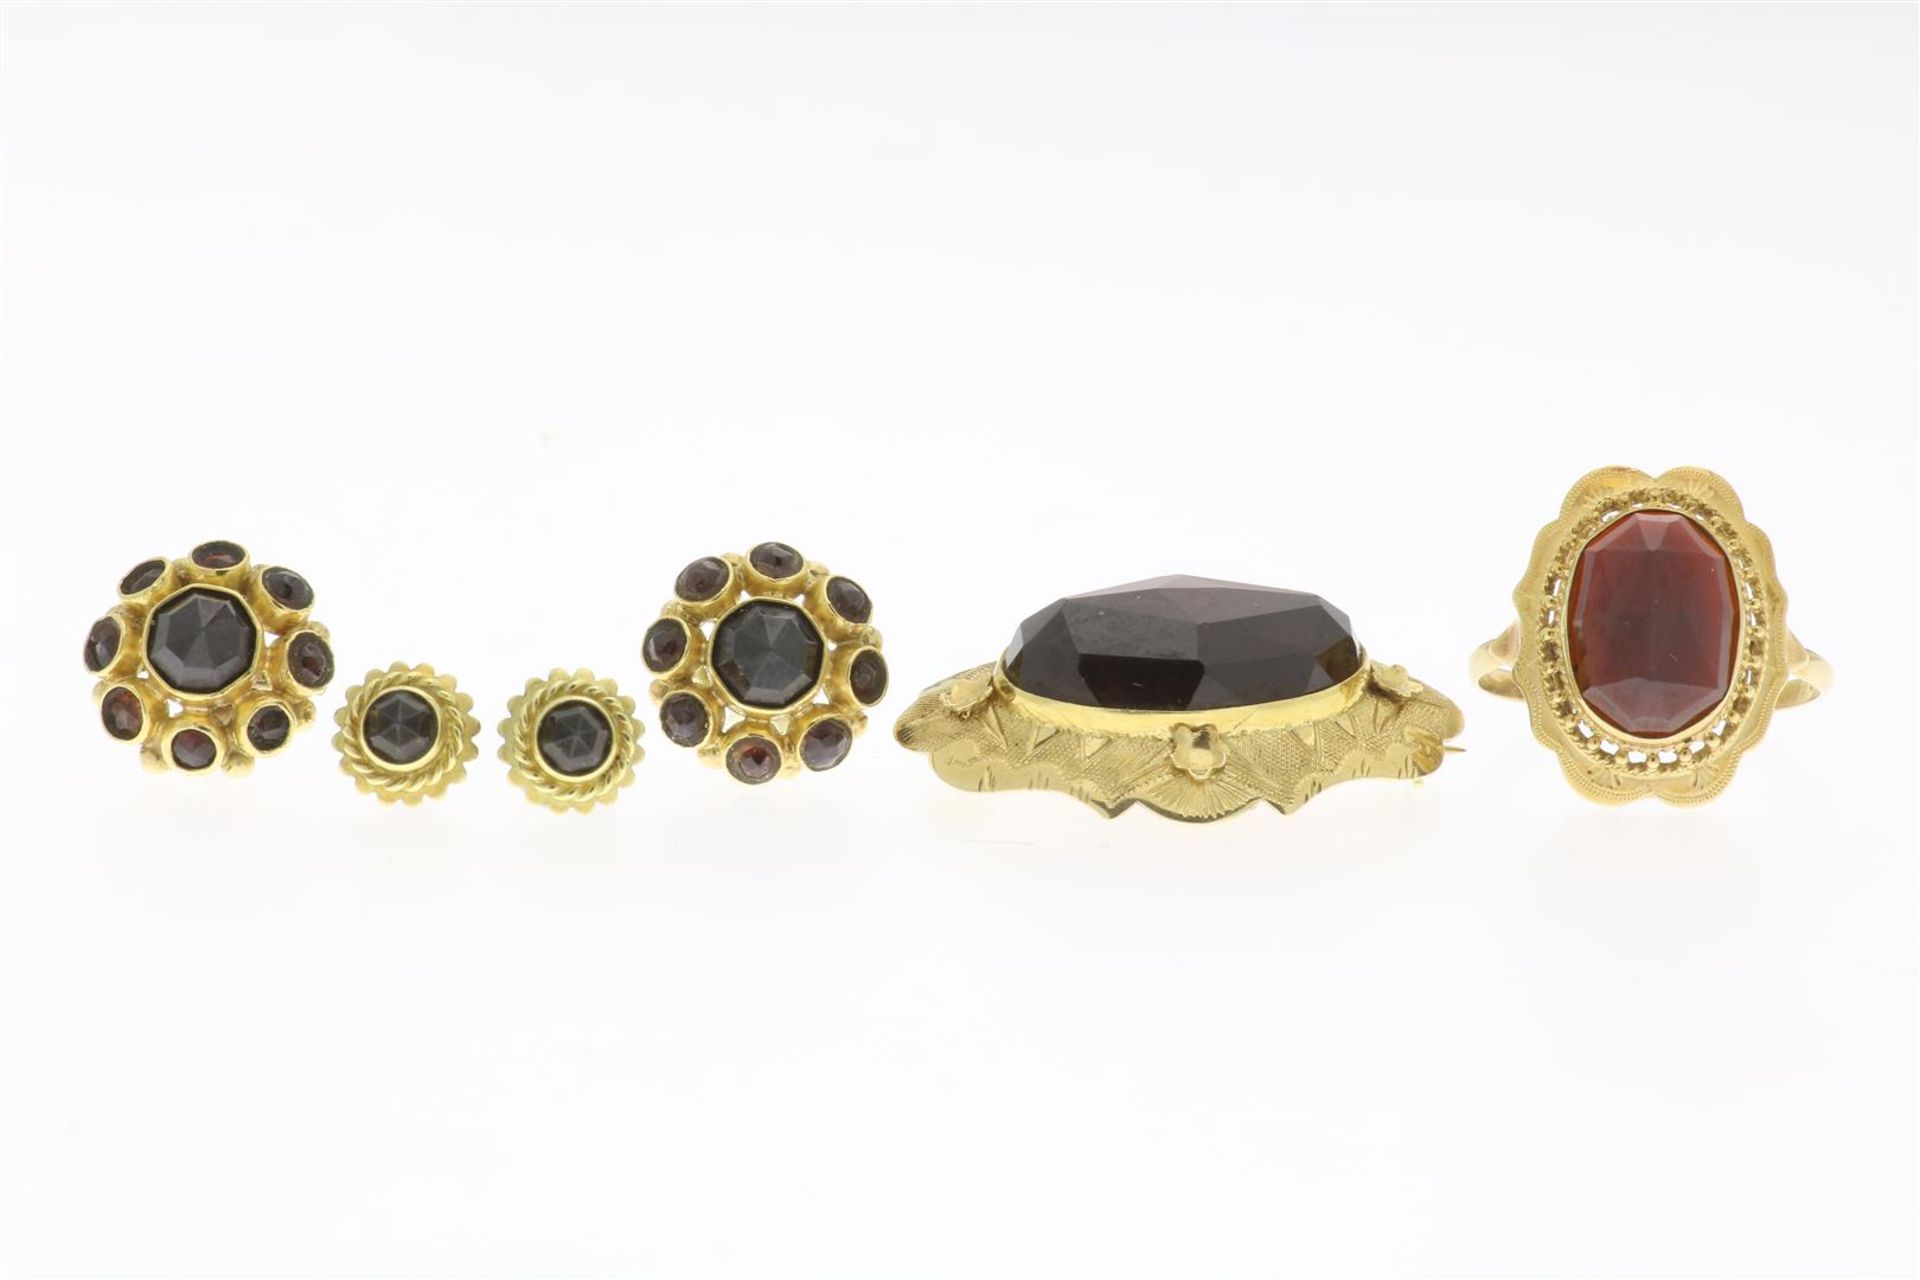 Lot of gold work including ear studs, brooch and ring set with garnet, gross weight 14.6 gr. Various